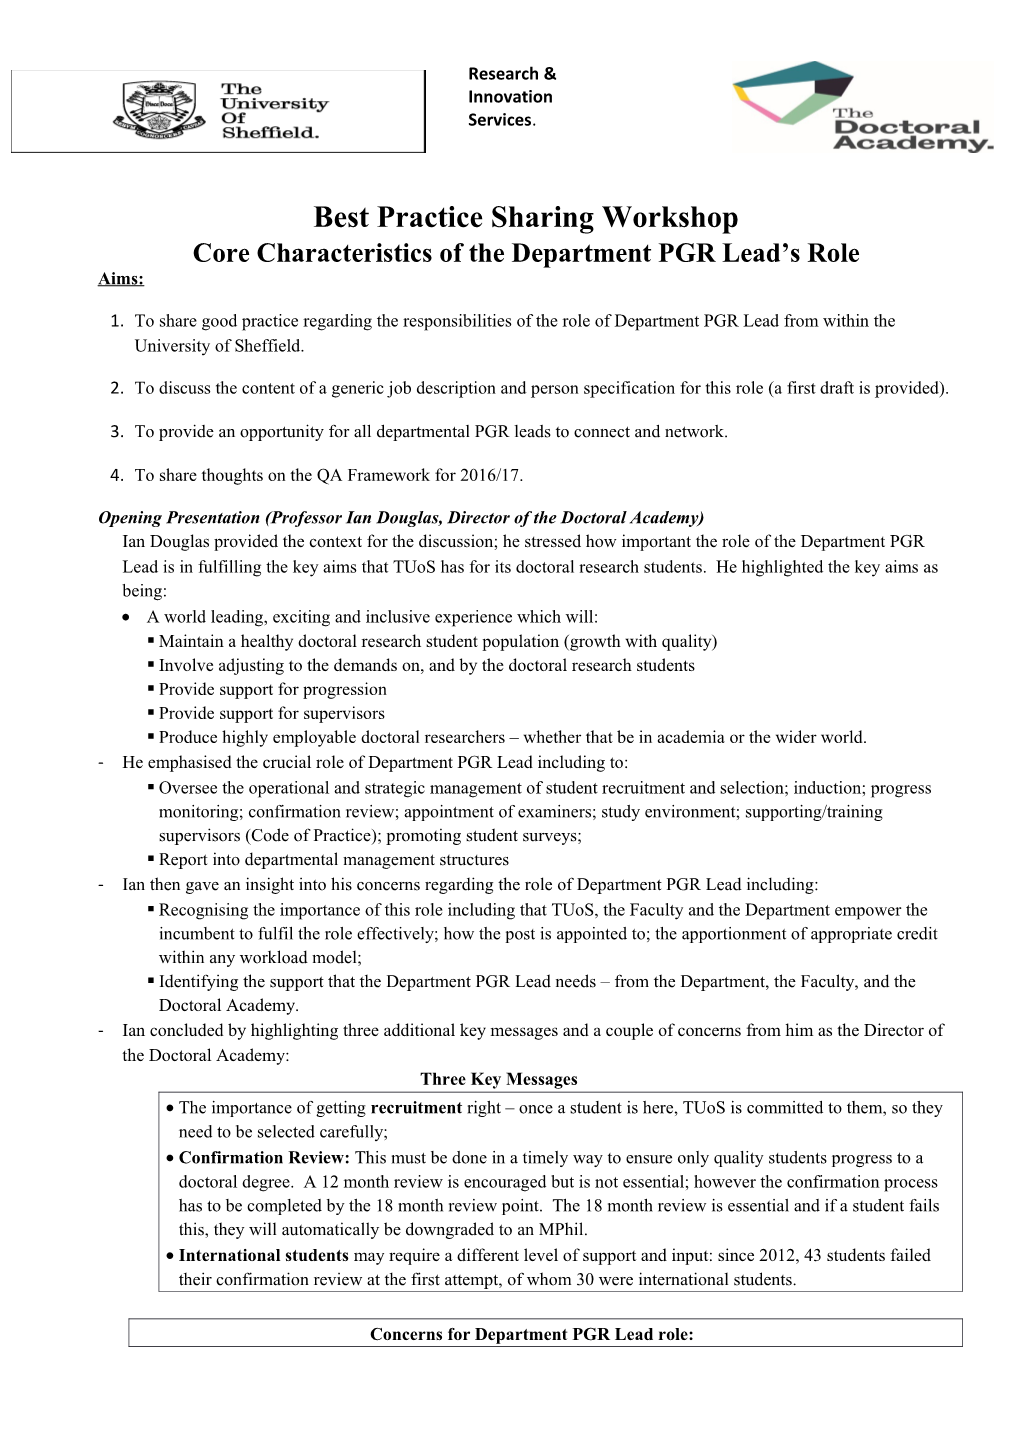 Core Characteristics of the Department PGR Lead S Role